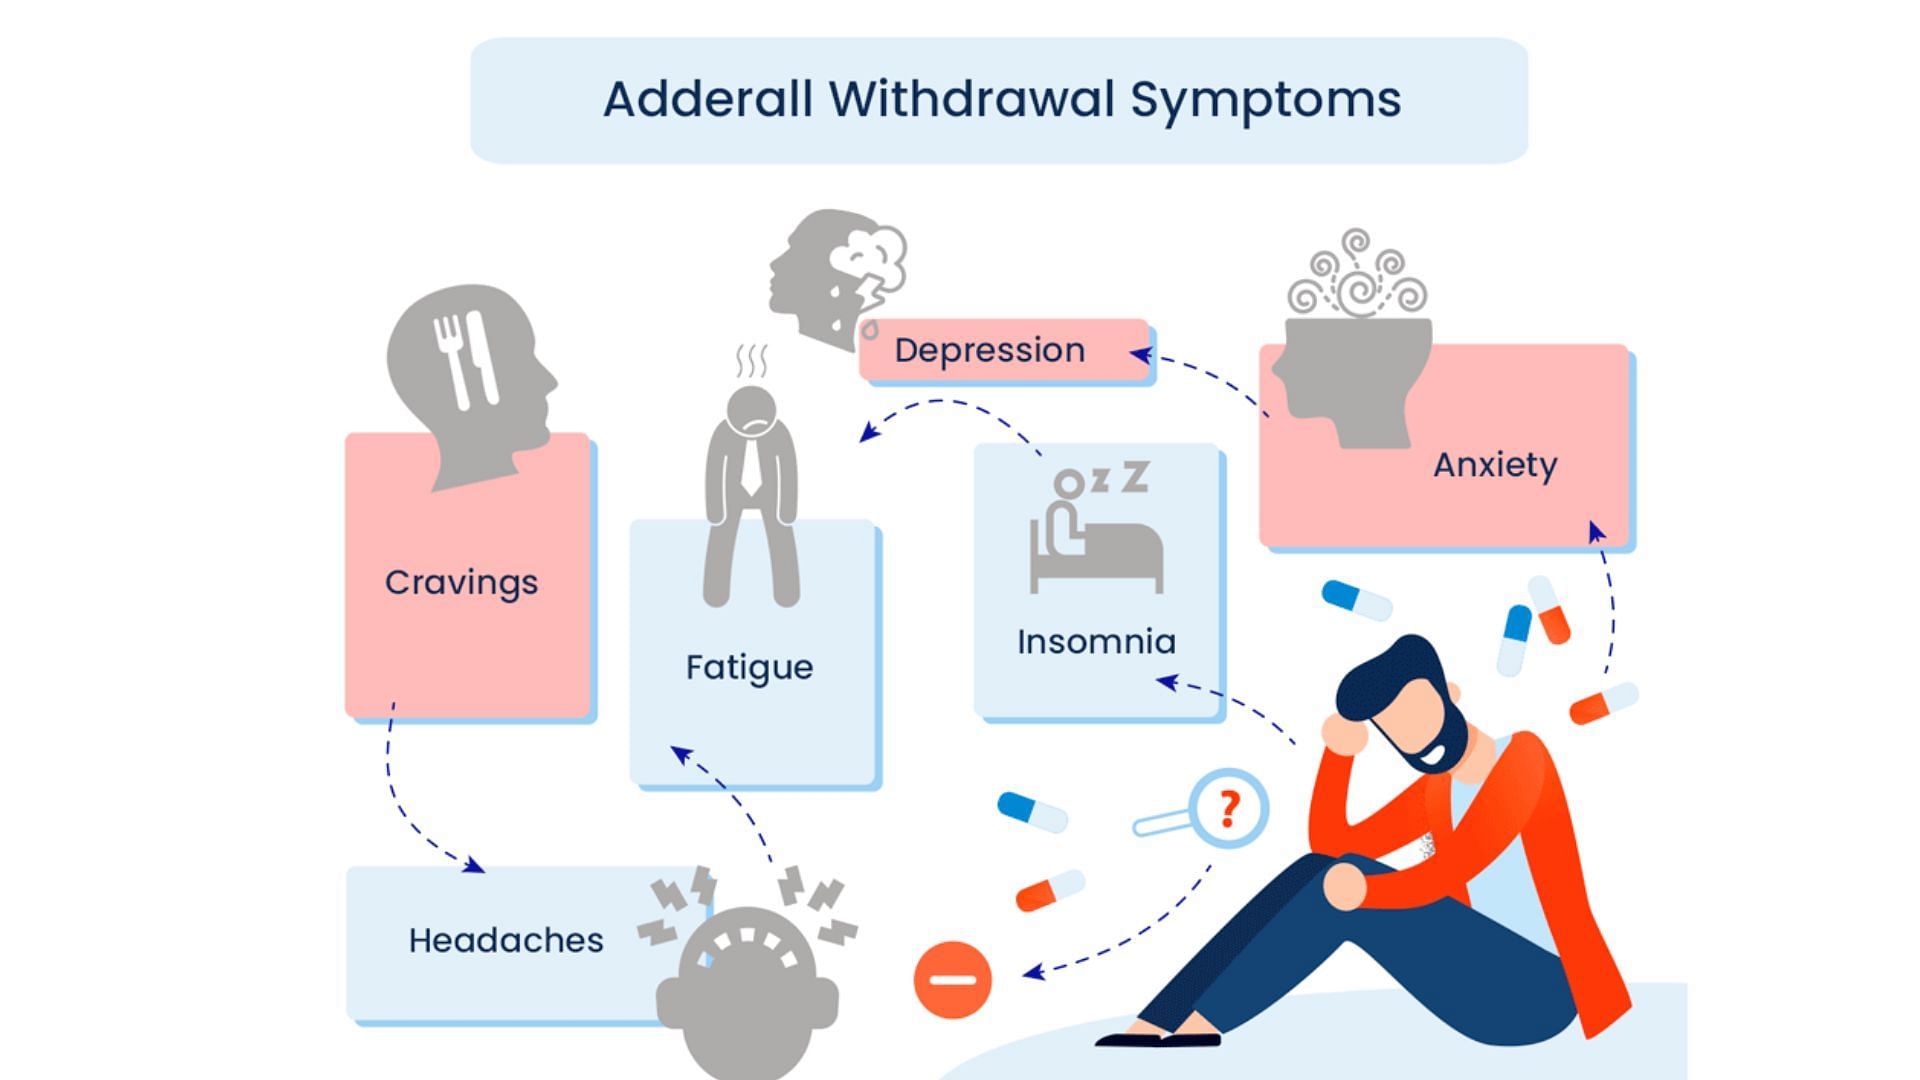 Some symptoms of Adderall withdrawal (image via Farrinstitute)